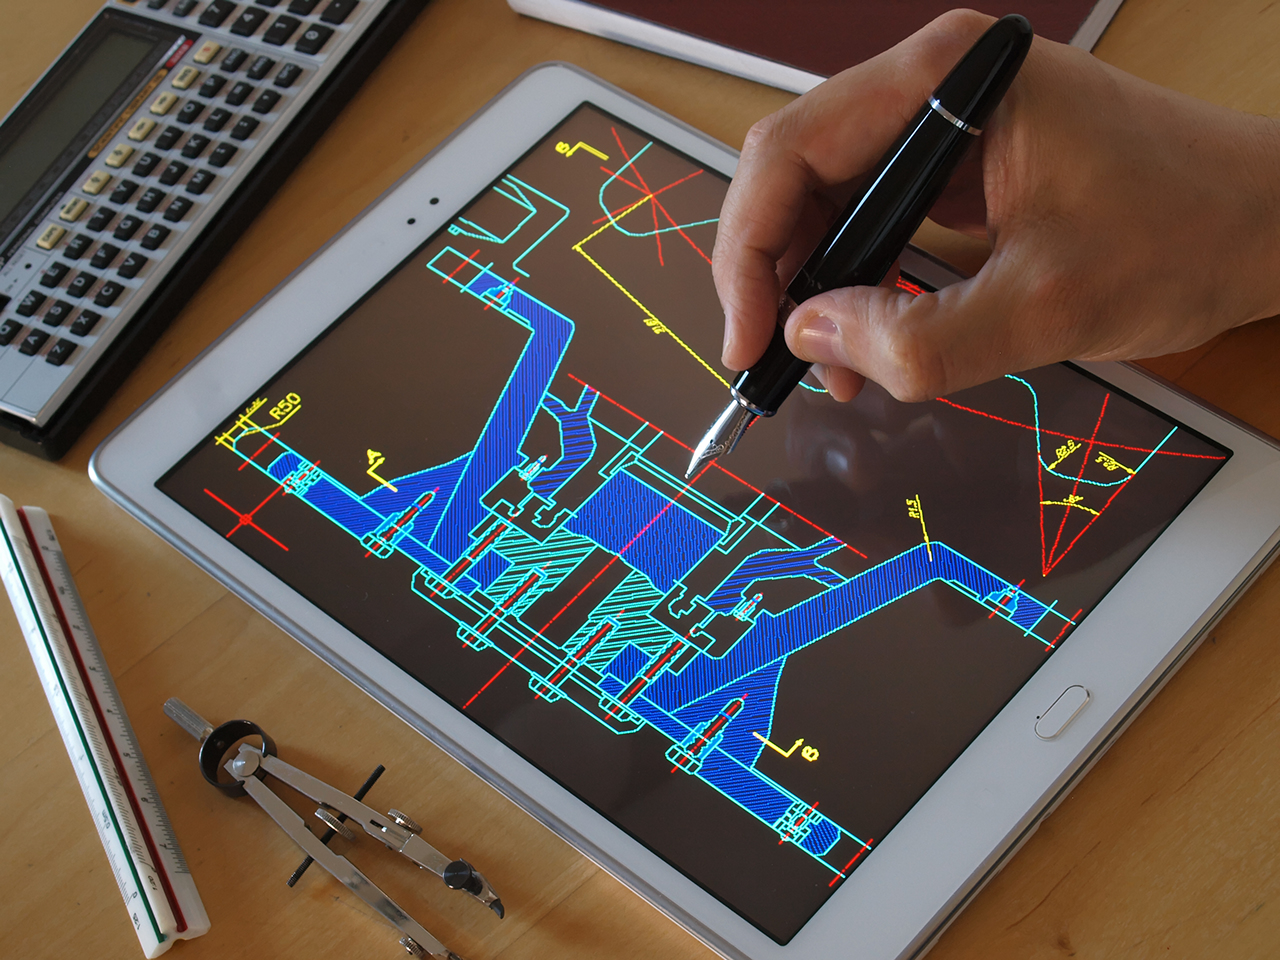 engineer designer working on cad blueprint using tablet computer tool    ; Shutterstock ID 604821596; purchase_order: -; job: -; client: -; other: -